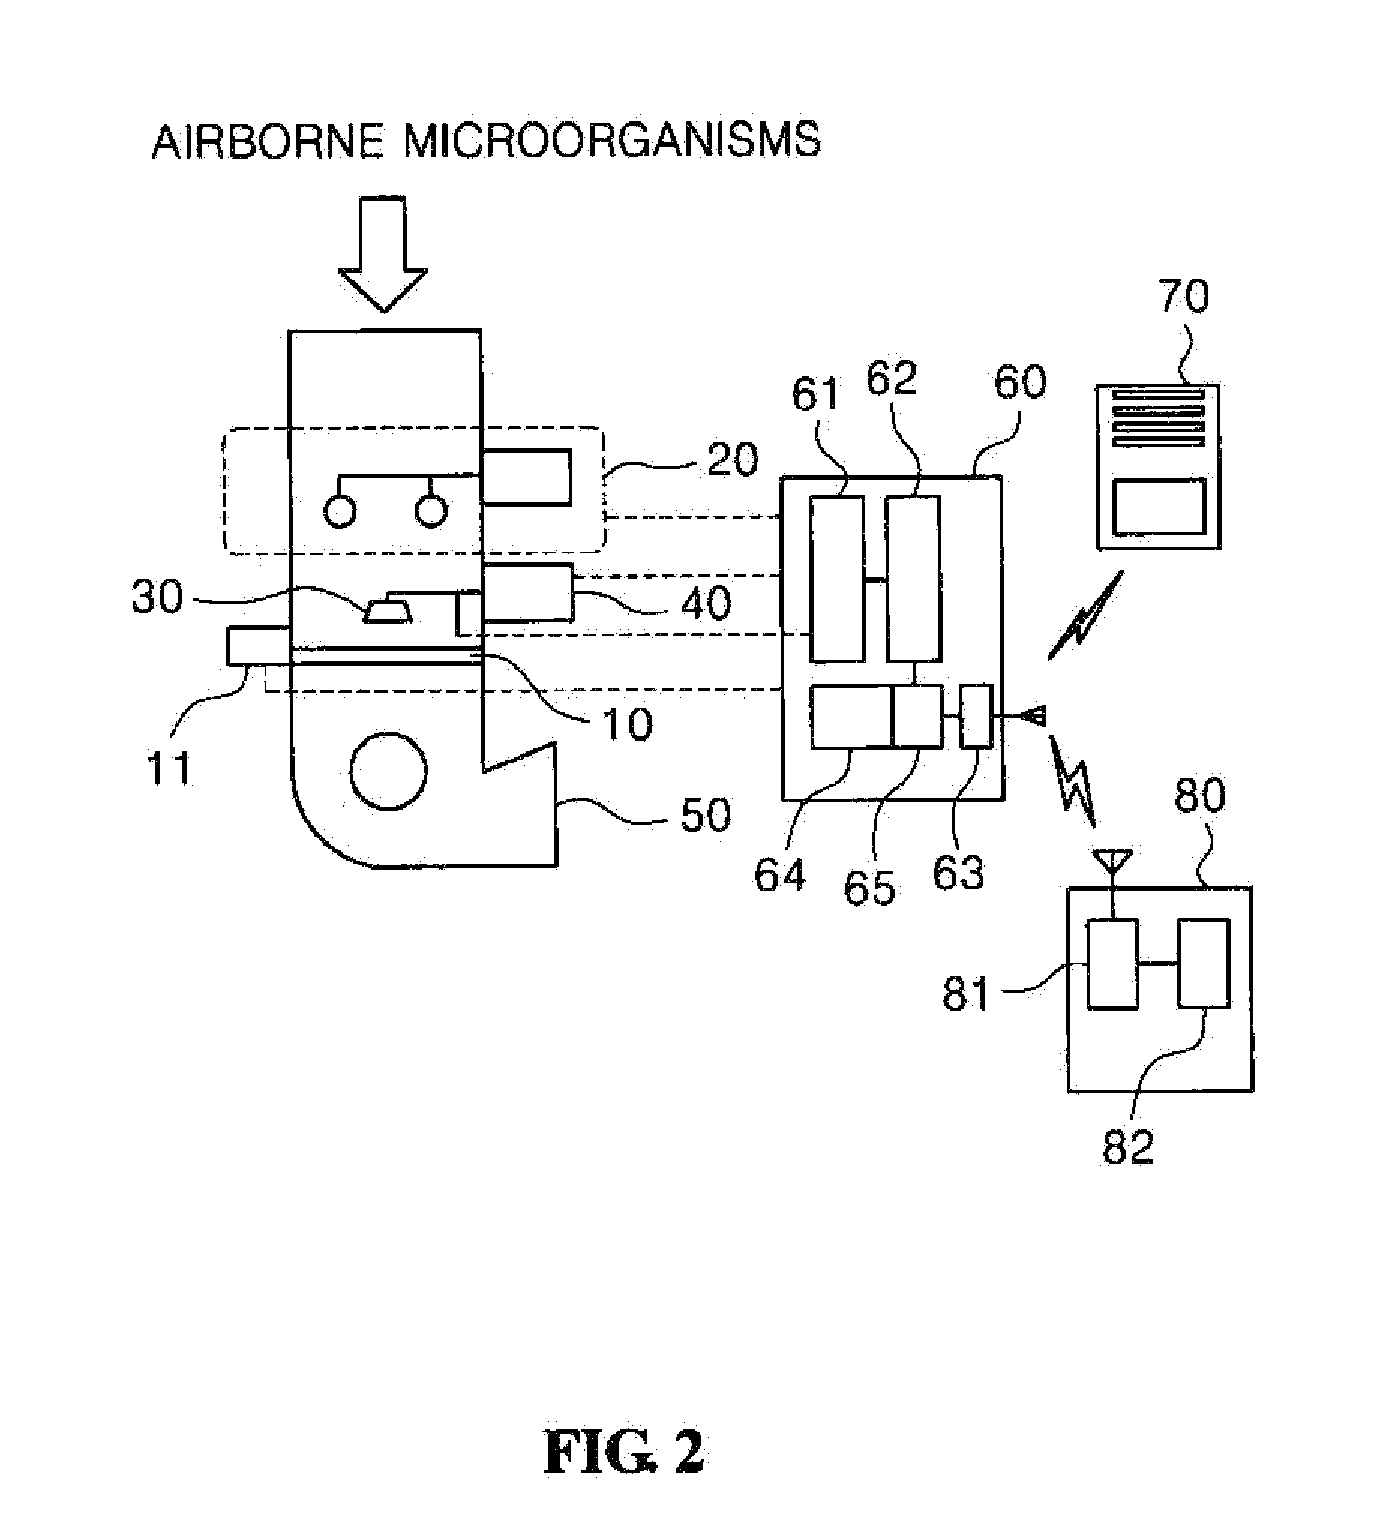 Apparatus for measuring floating microorganisms in a gas phase in real time using a system for dissolving microorganisms and ATP illumination, and method for detecting same